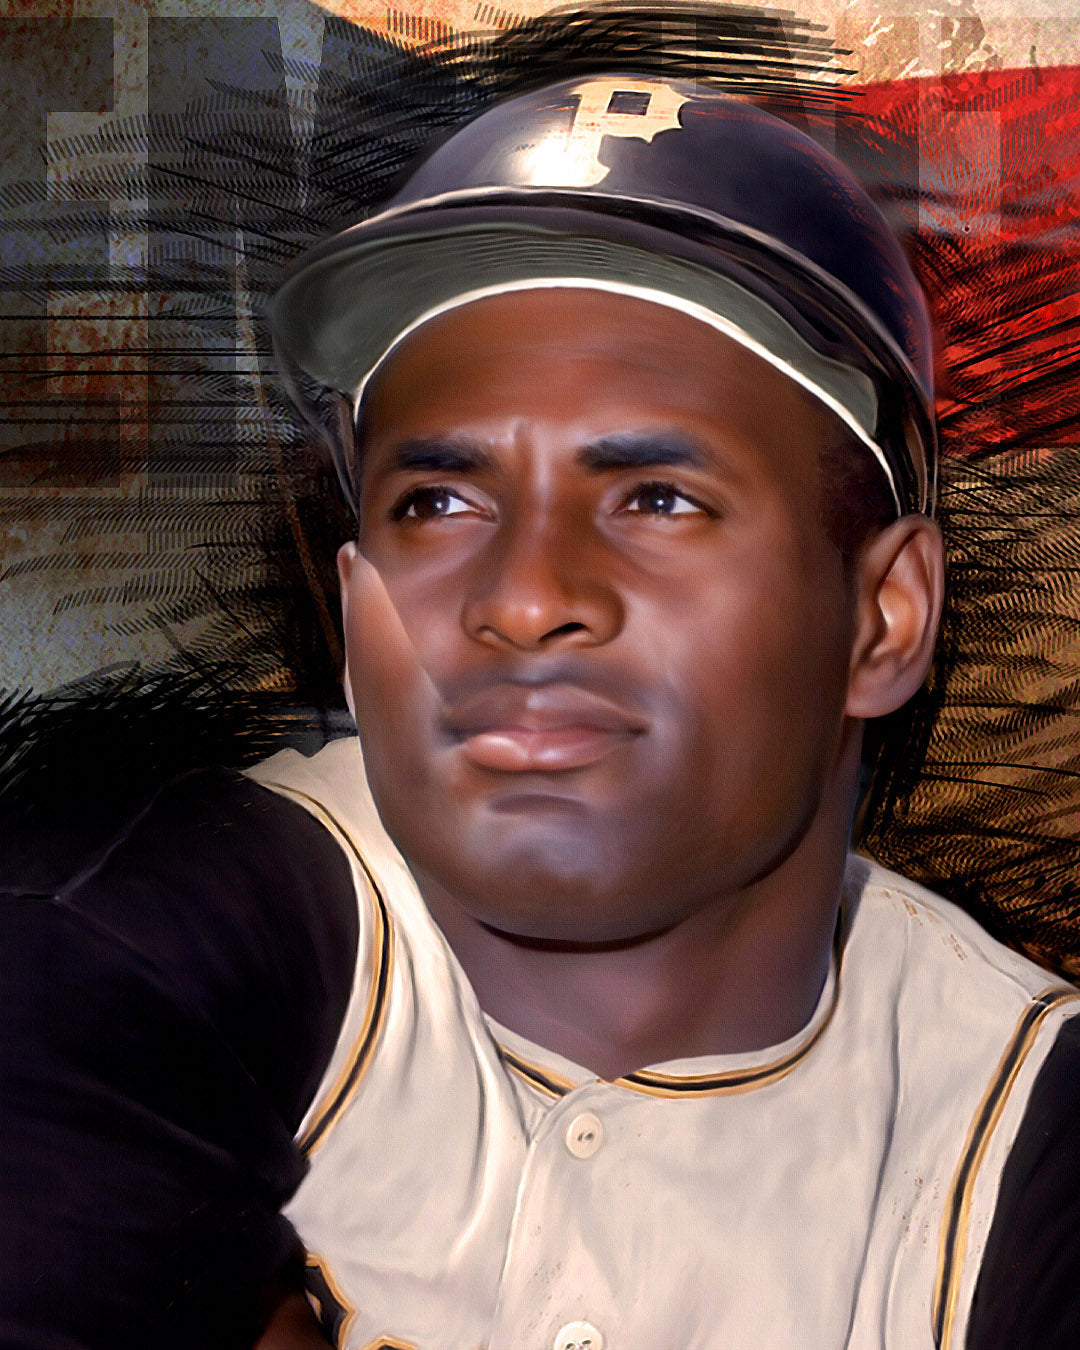 Roberto Clemente – ChampionshipArt - The Art of Champions